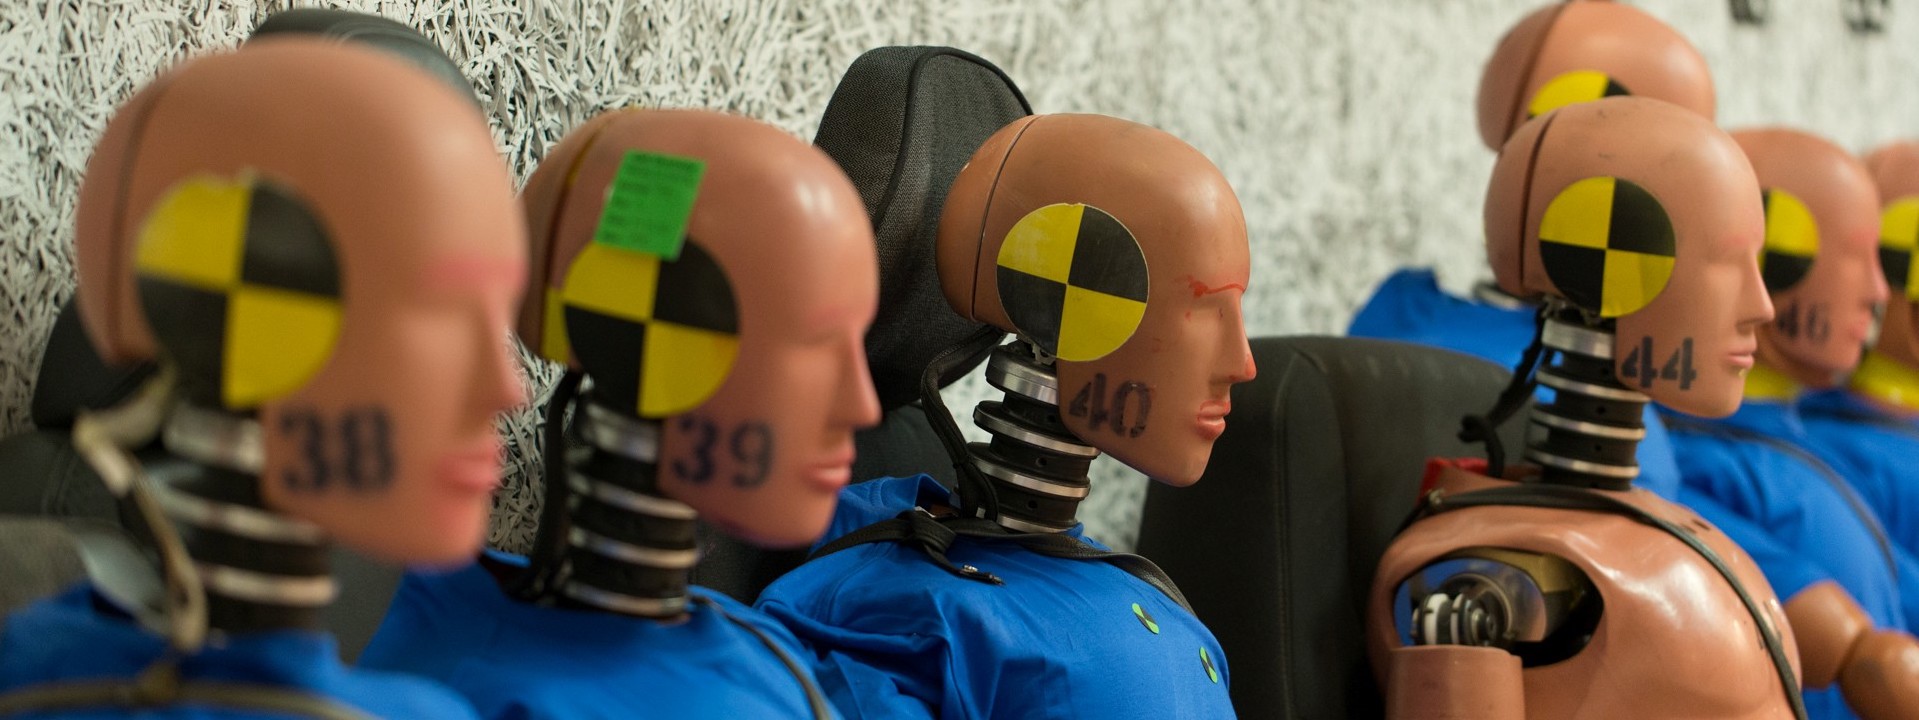 Who Made That Crash-Test Dummy? - The New York Times